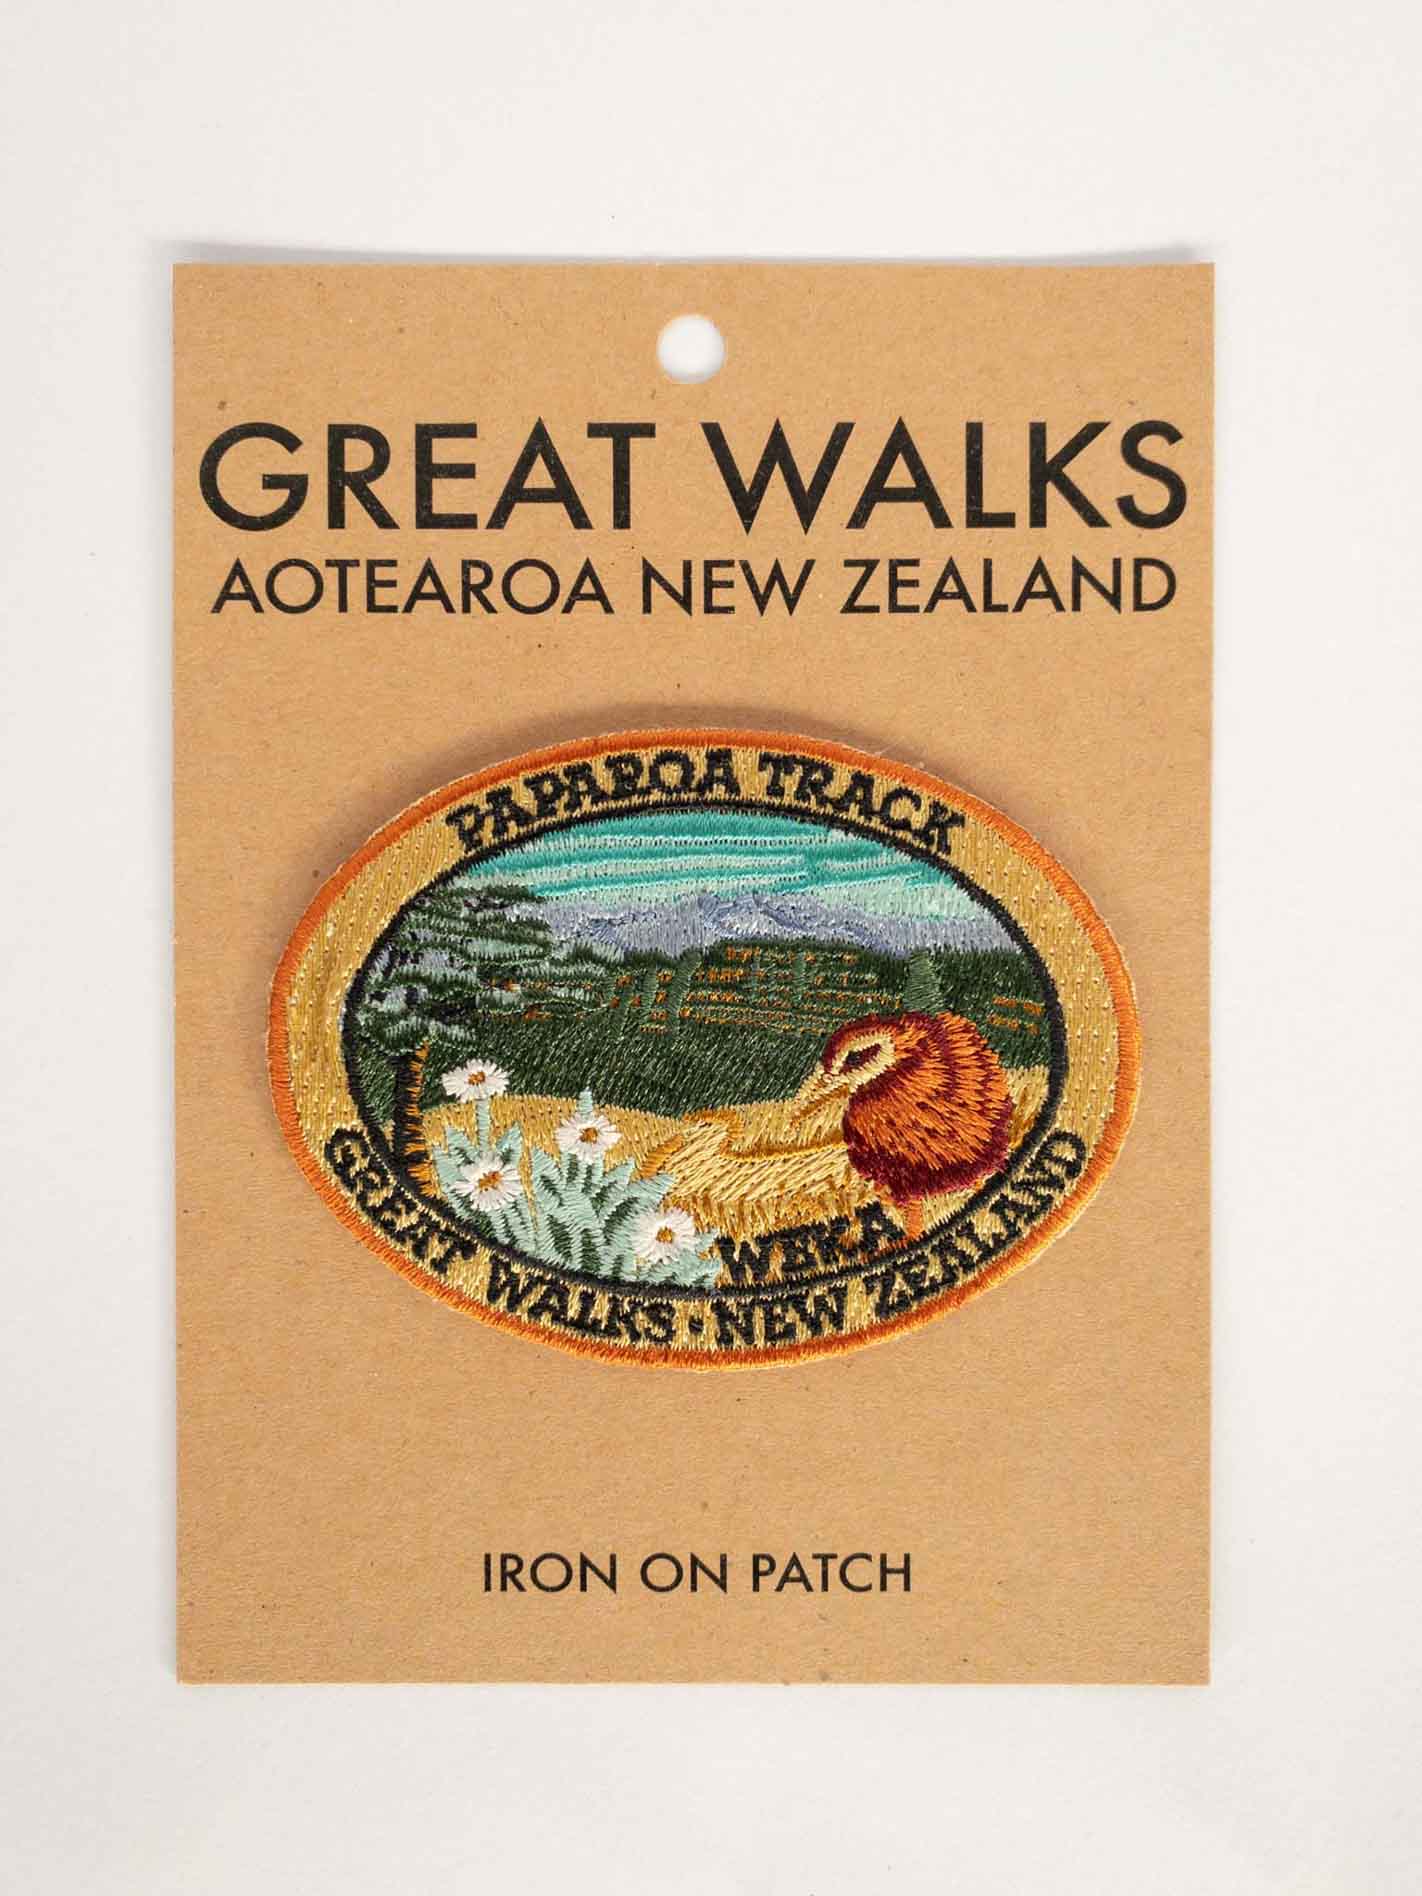 Oval, embroidered Paparoa Track patch, with a weka, green hills, mountain daisy and tussock, on brown kraft backing card.